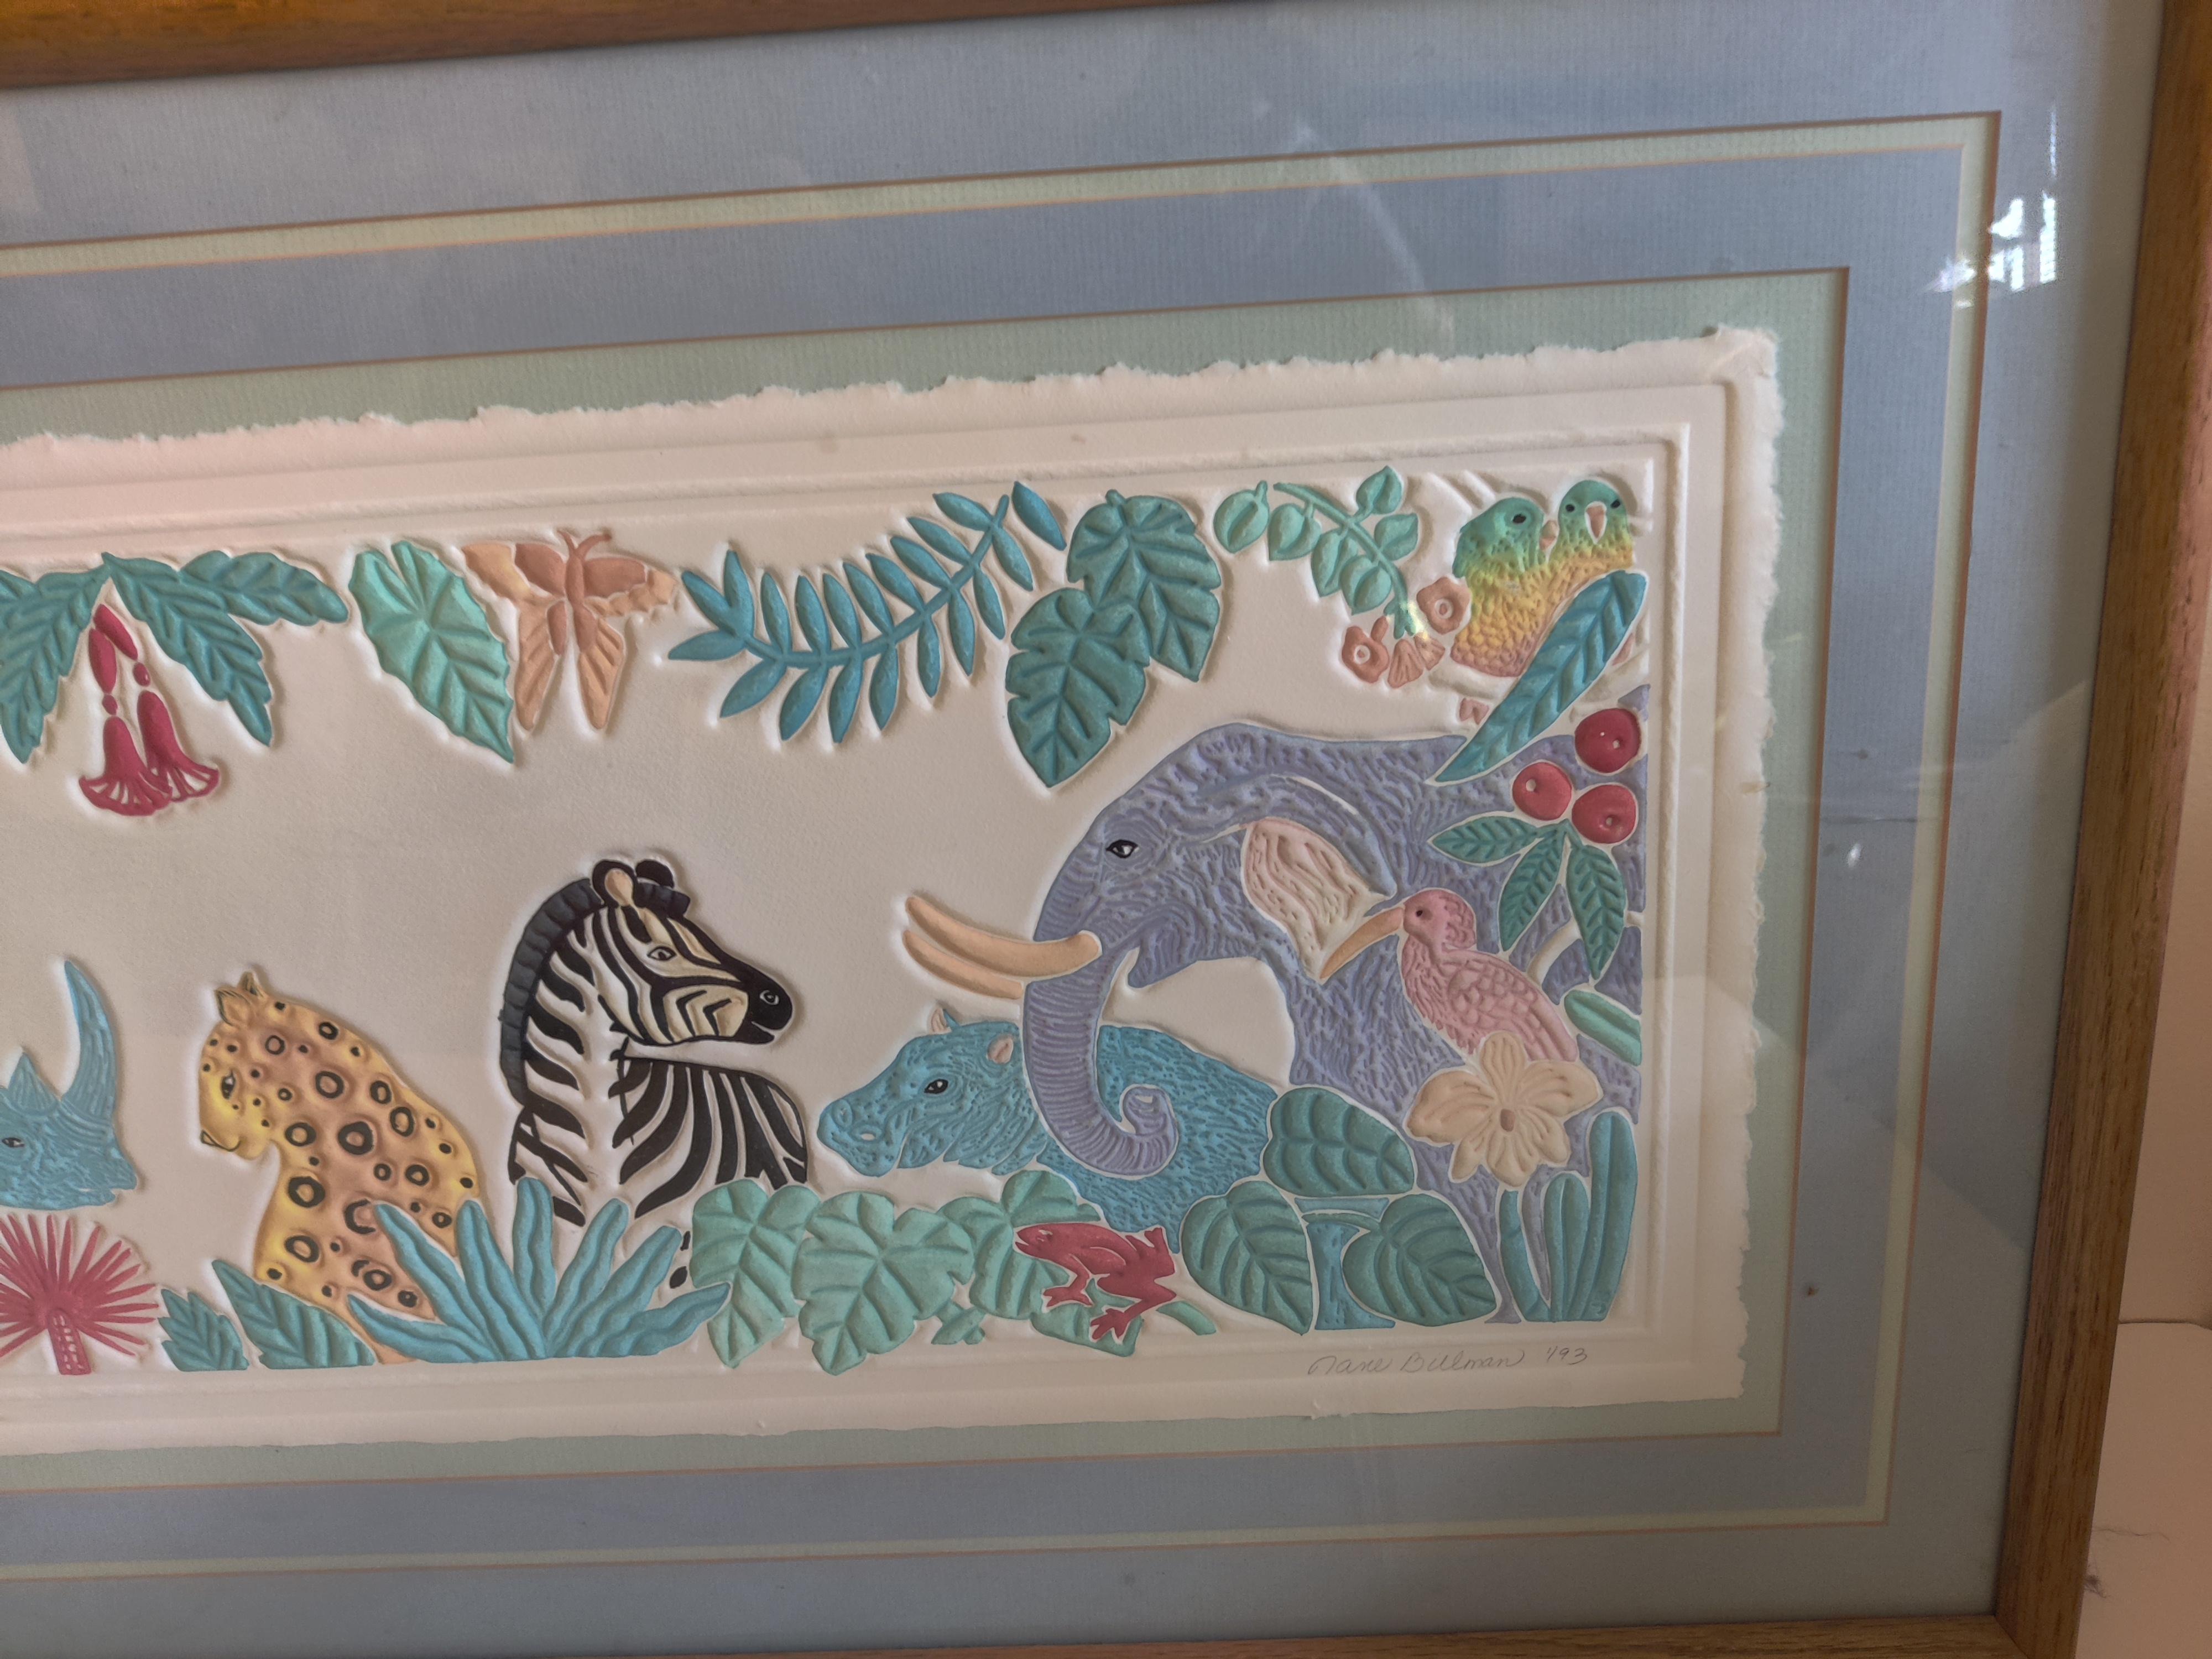 Jungle Beat Embossed framed limited edition 72/250 by artist Jane Billman In Good Condition For Sale In Cincinnati, OH